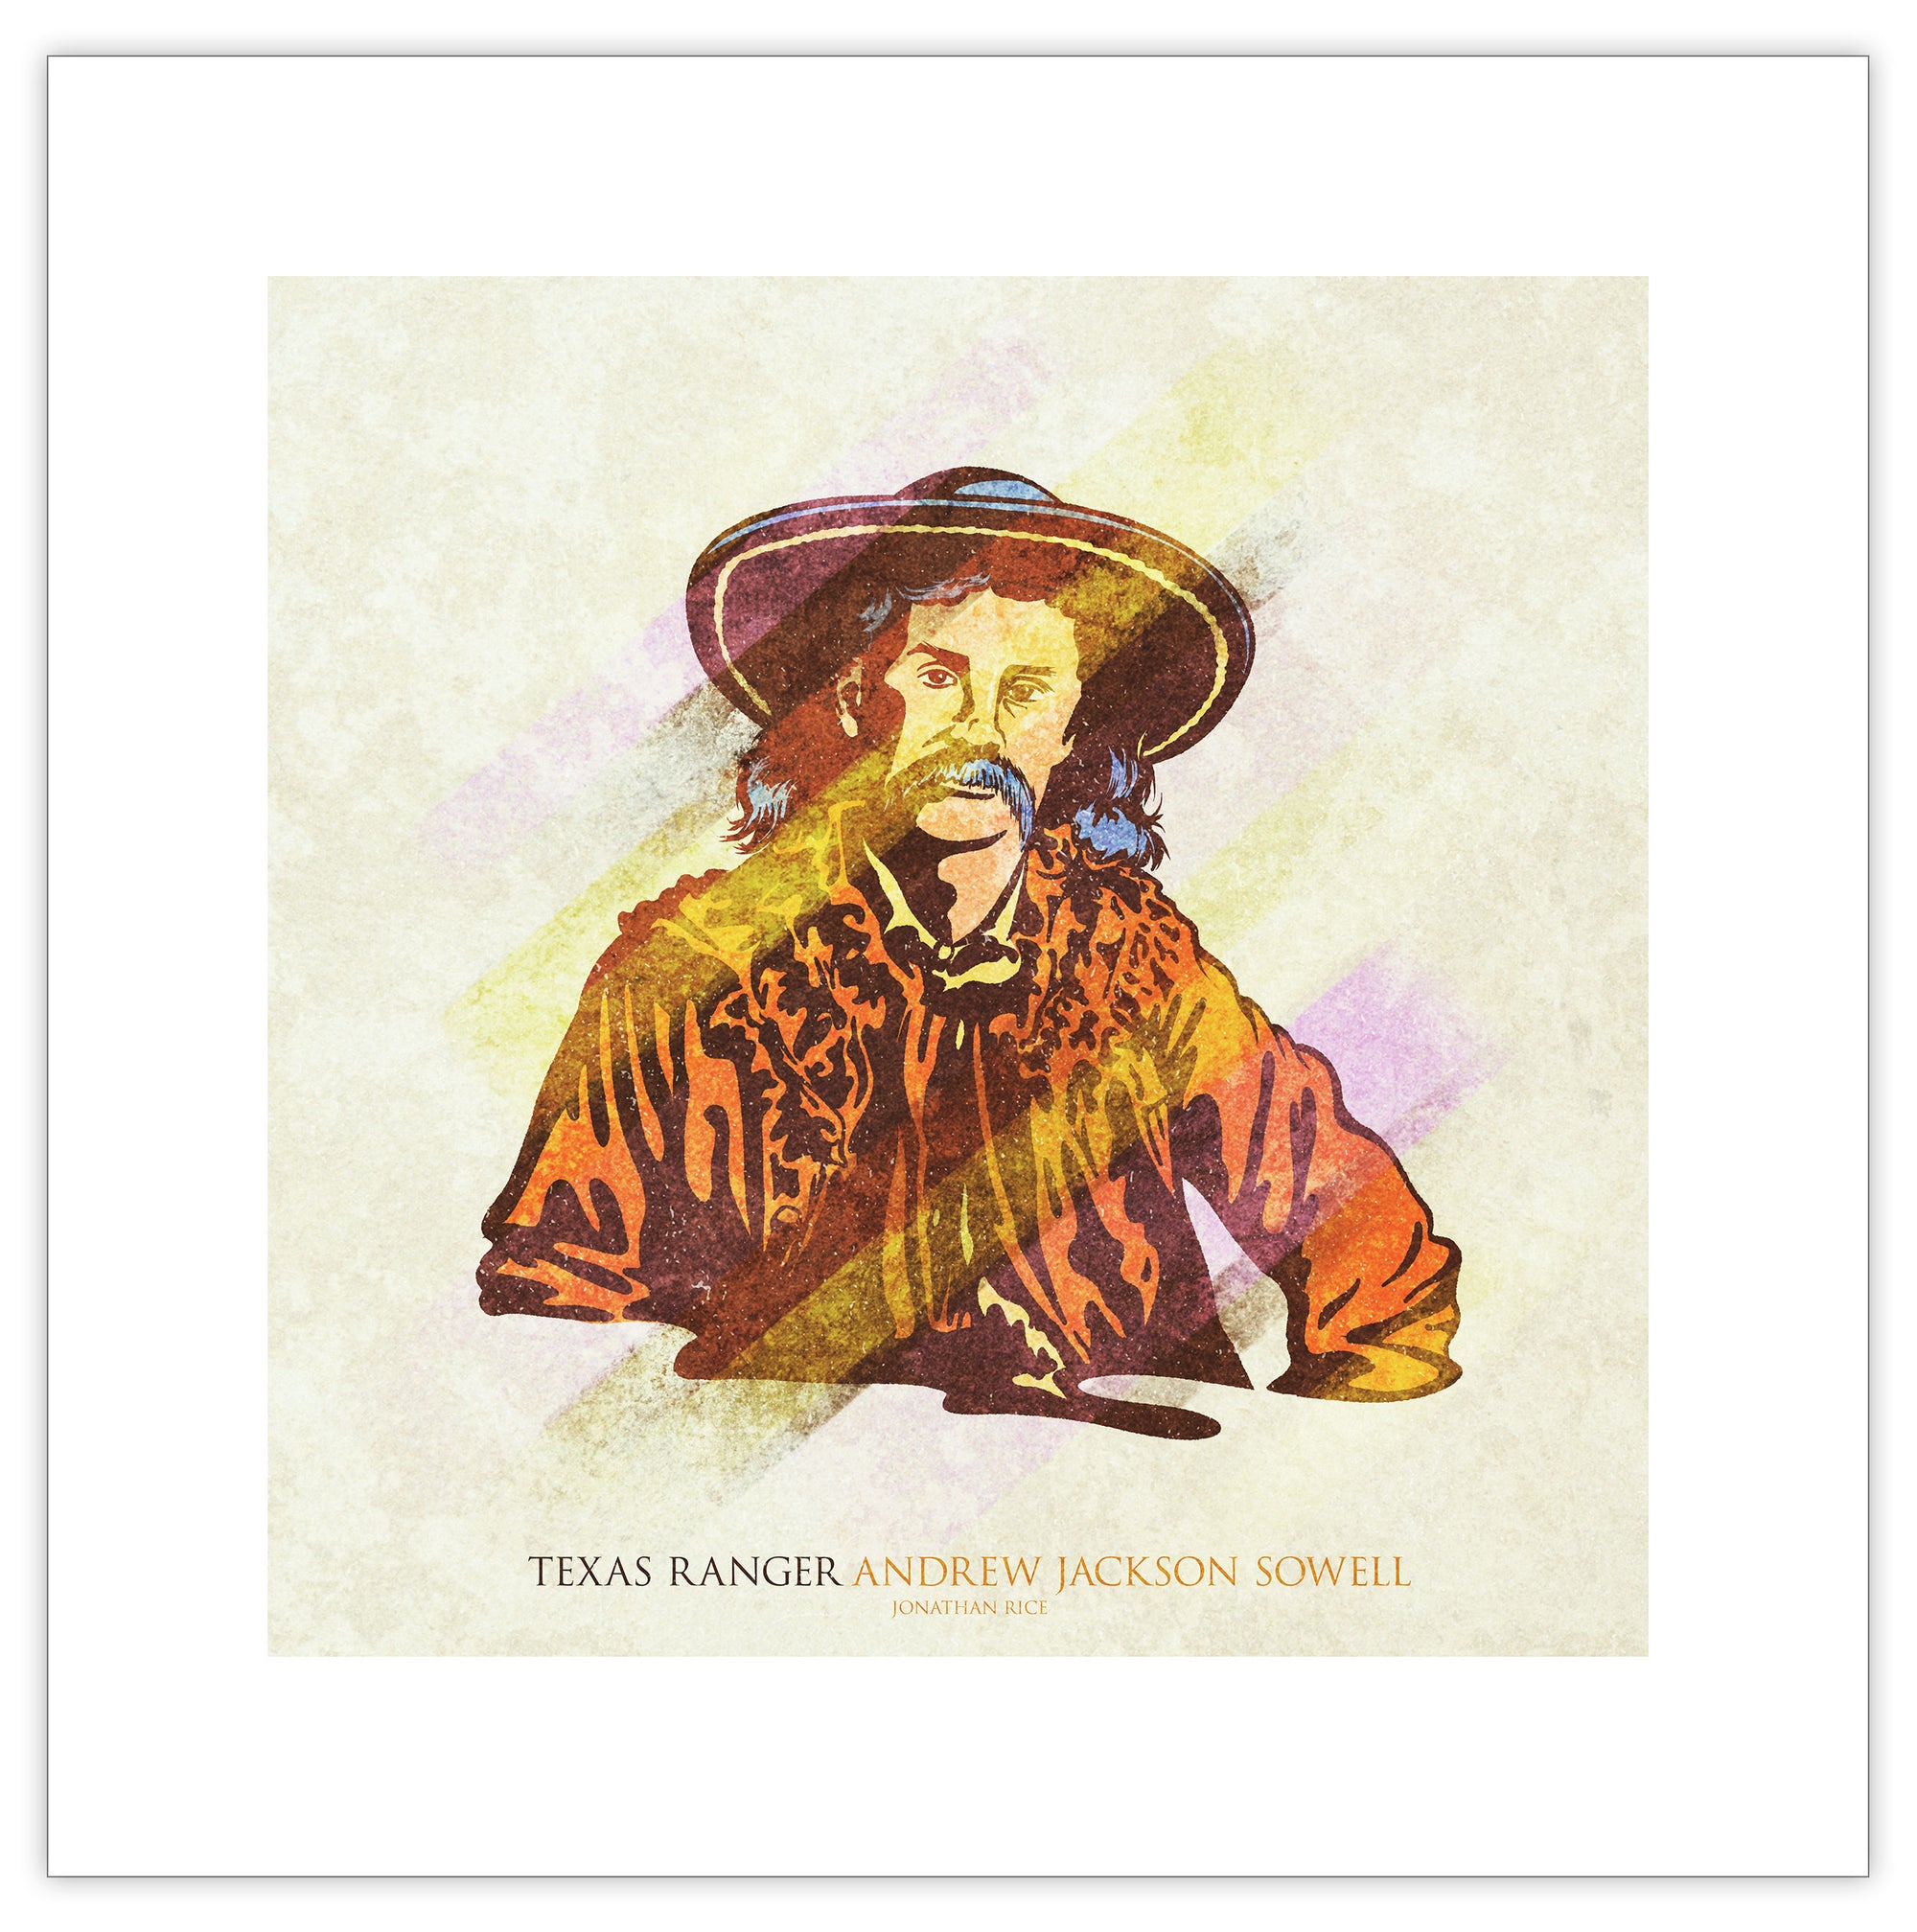 Retro styled art print of 1800’s Texas Ranger Andrew Jackson Sowell. Bold graphic lines are complemented by colorful streaks giving the piece a sense of movement. The print has the words “Texas Ranger Andrew Jackson Sowell” on it.